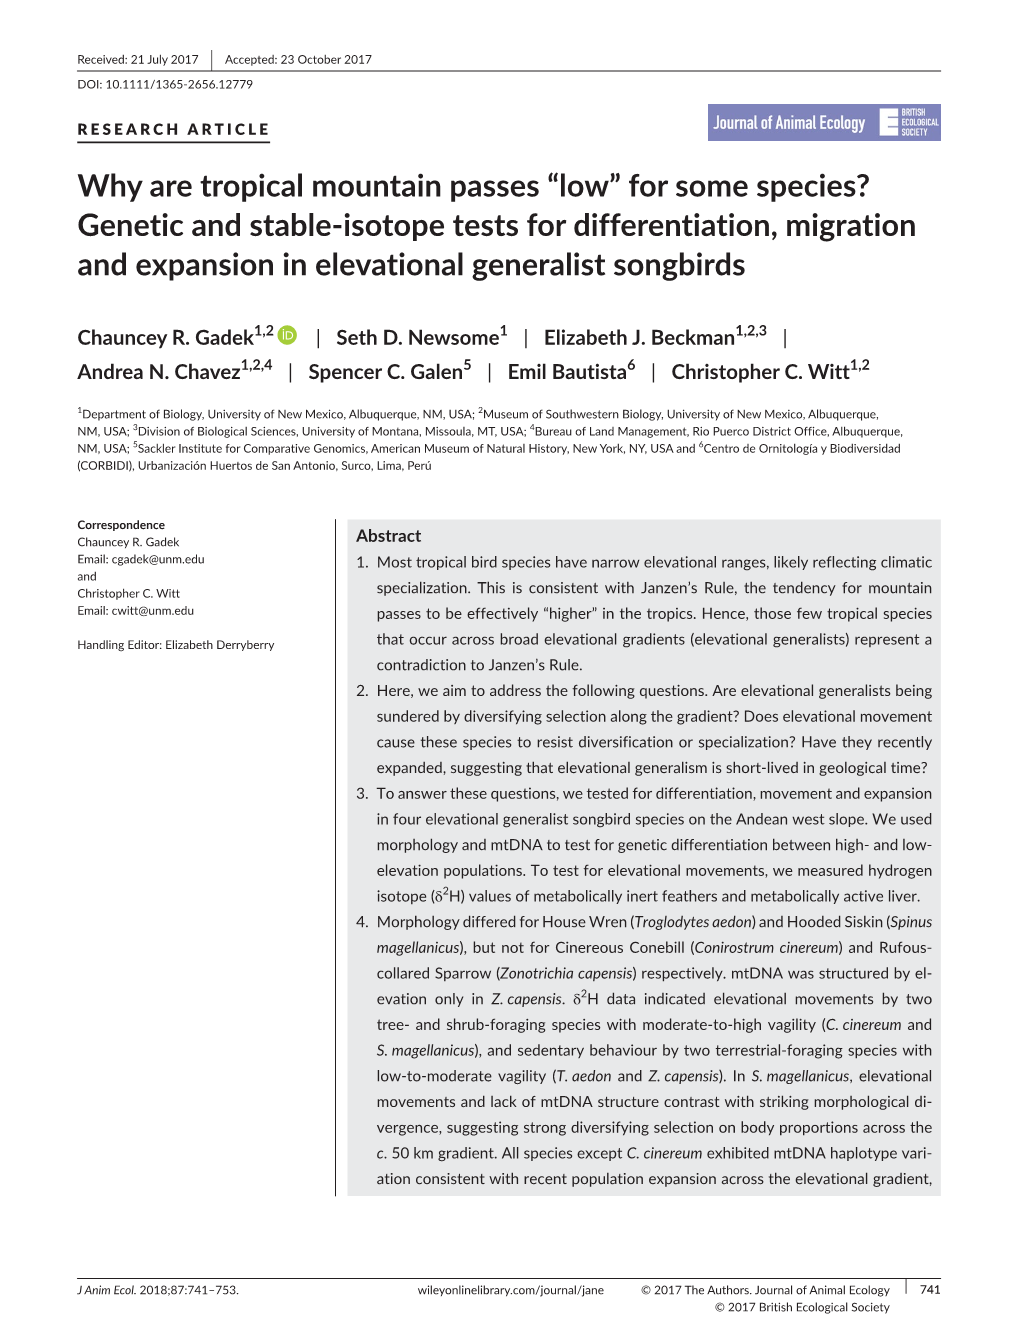 Why Are Tropical Mountain Passes “Low” for Some Species? Genetic